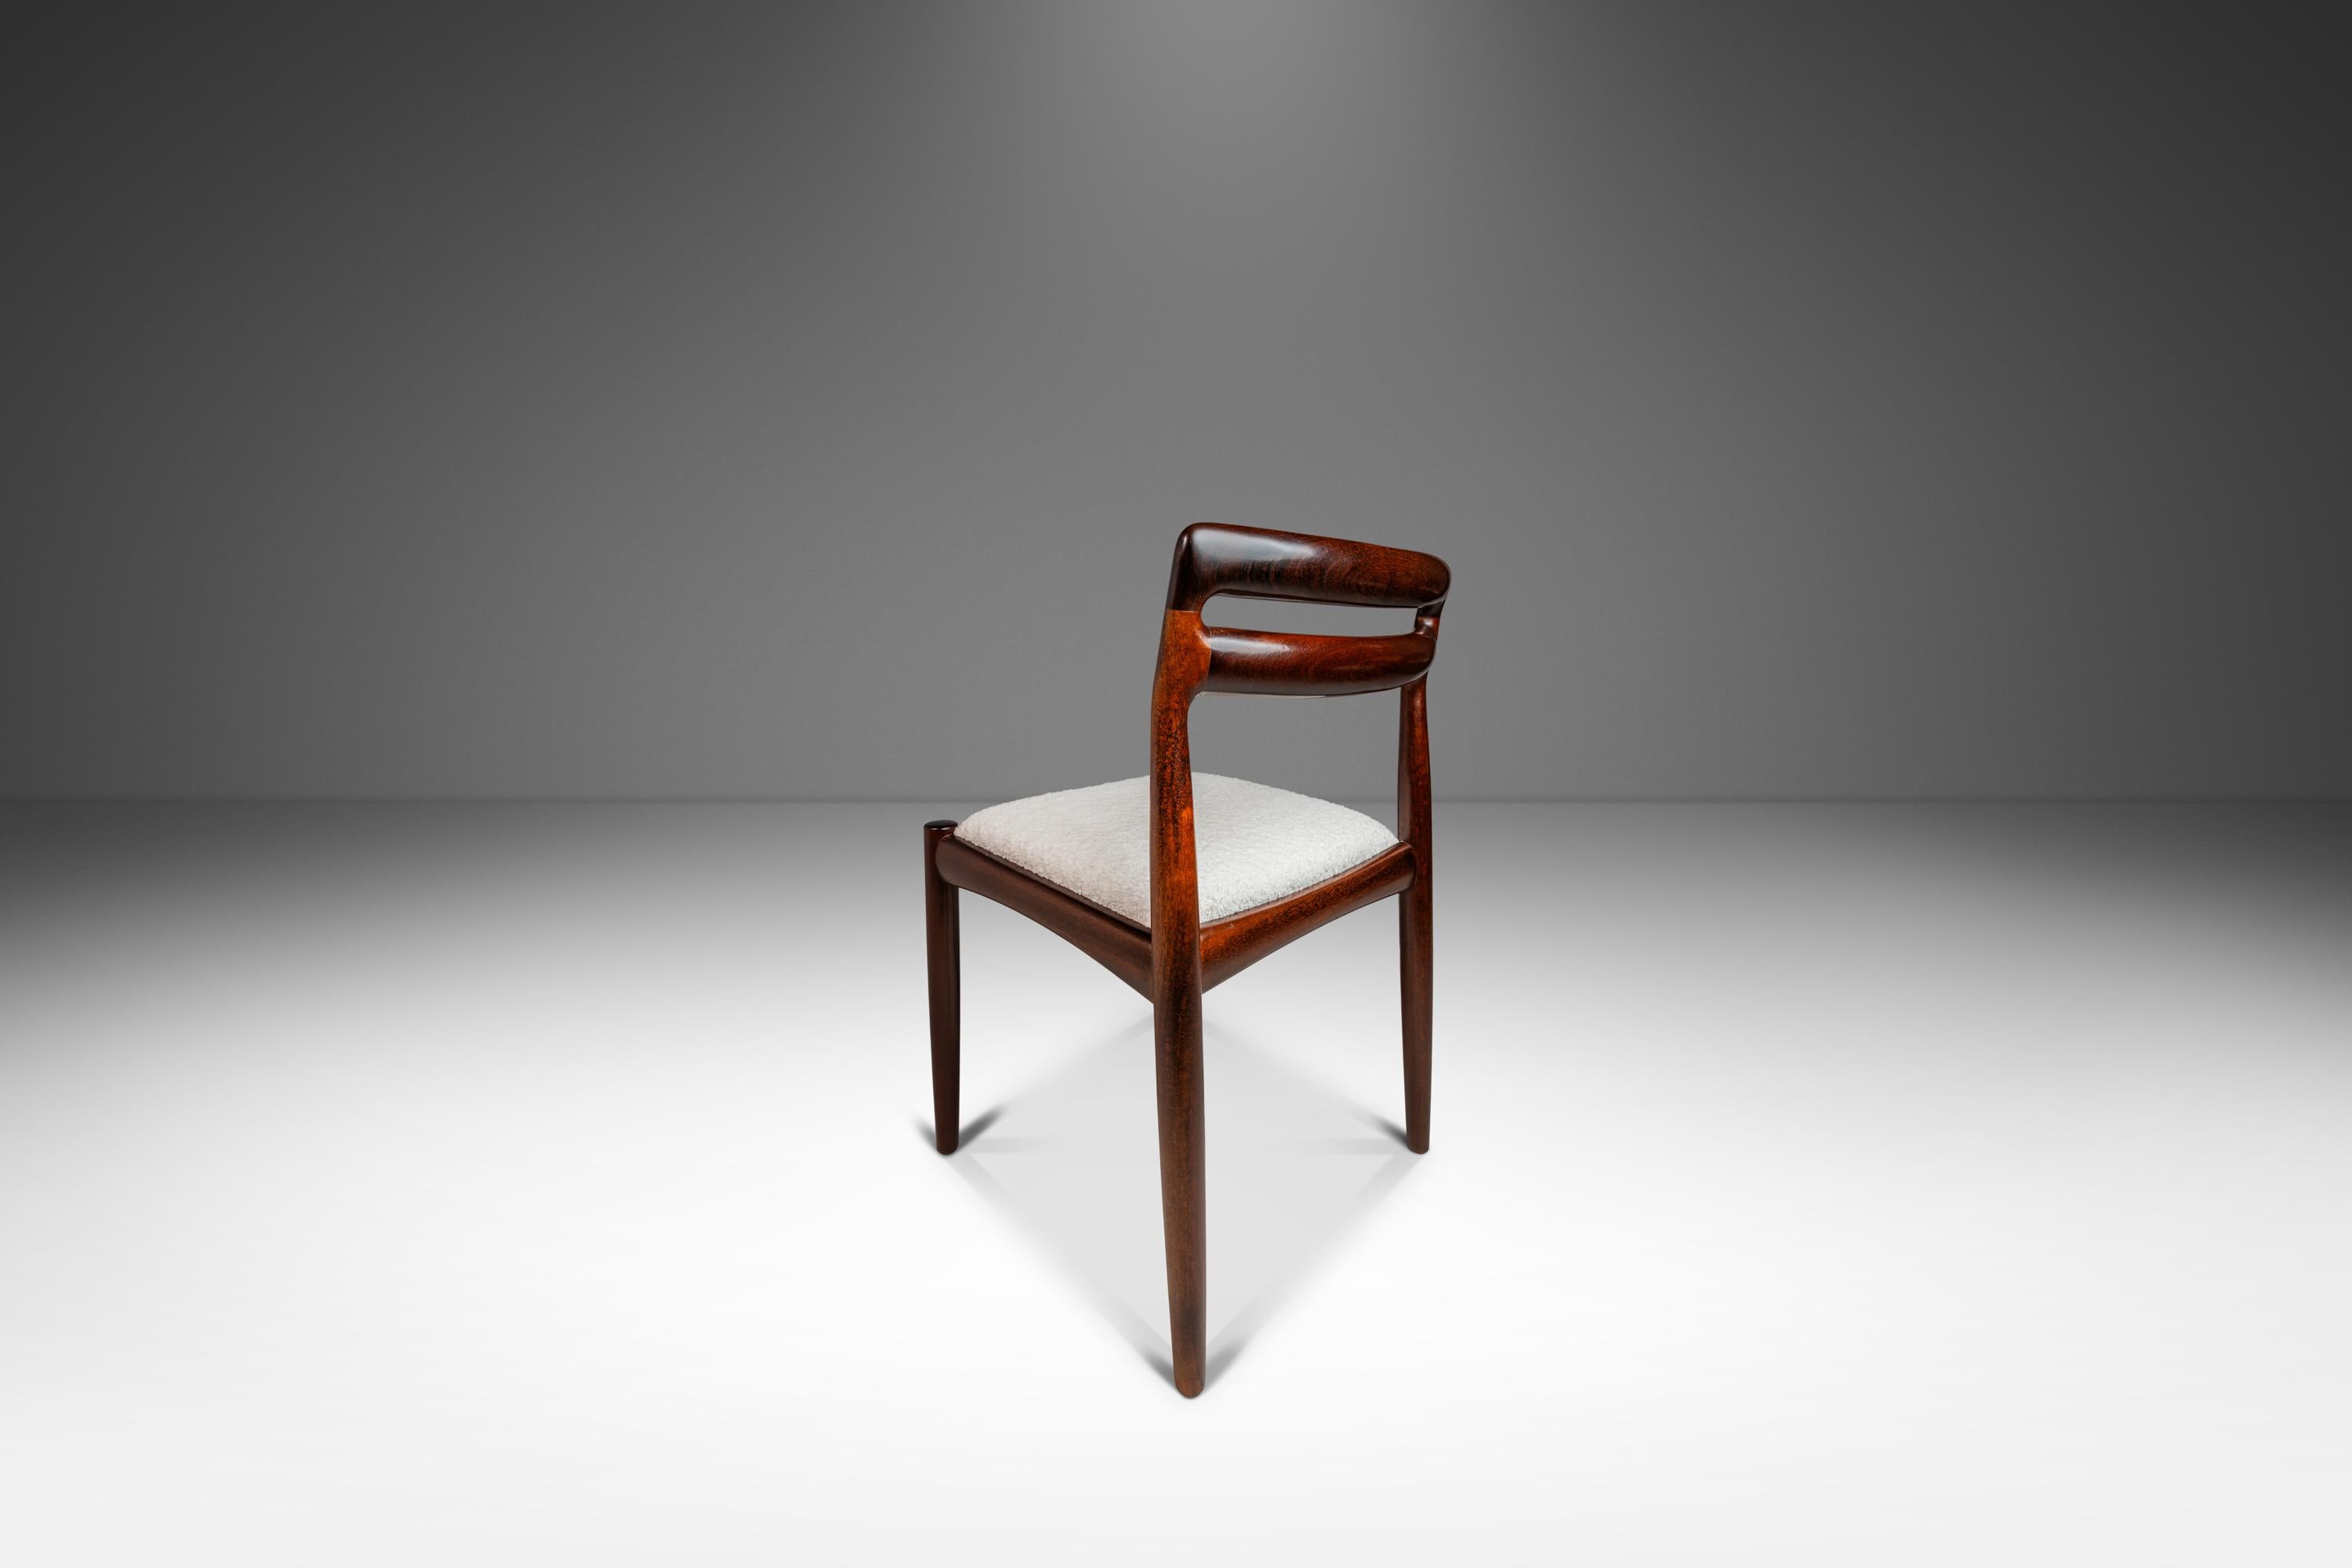 Mid-20th Century Set of 4 Model 382 Dining Chairs in Mahogany by H.W. Klein, Denmark, c. 1960s For Sale